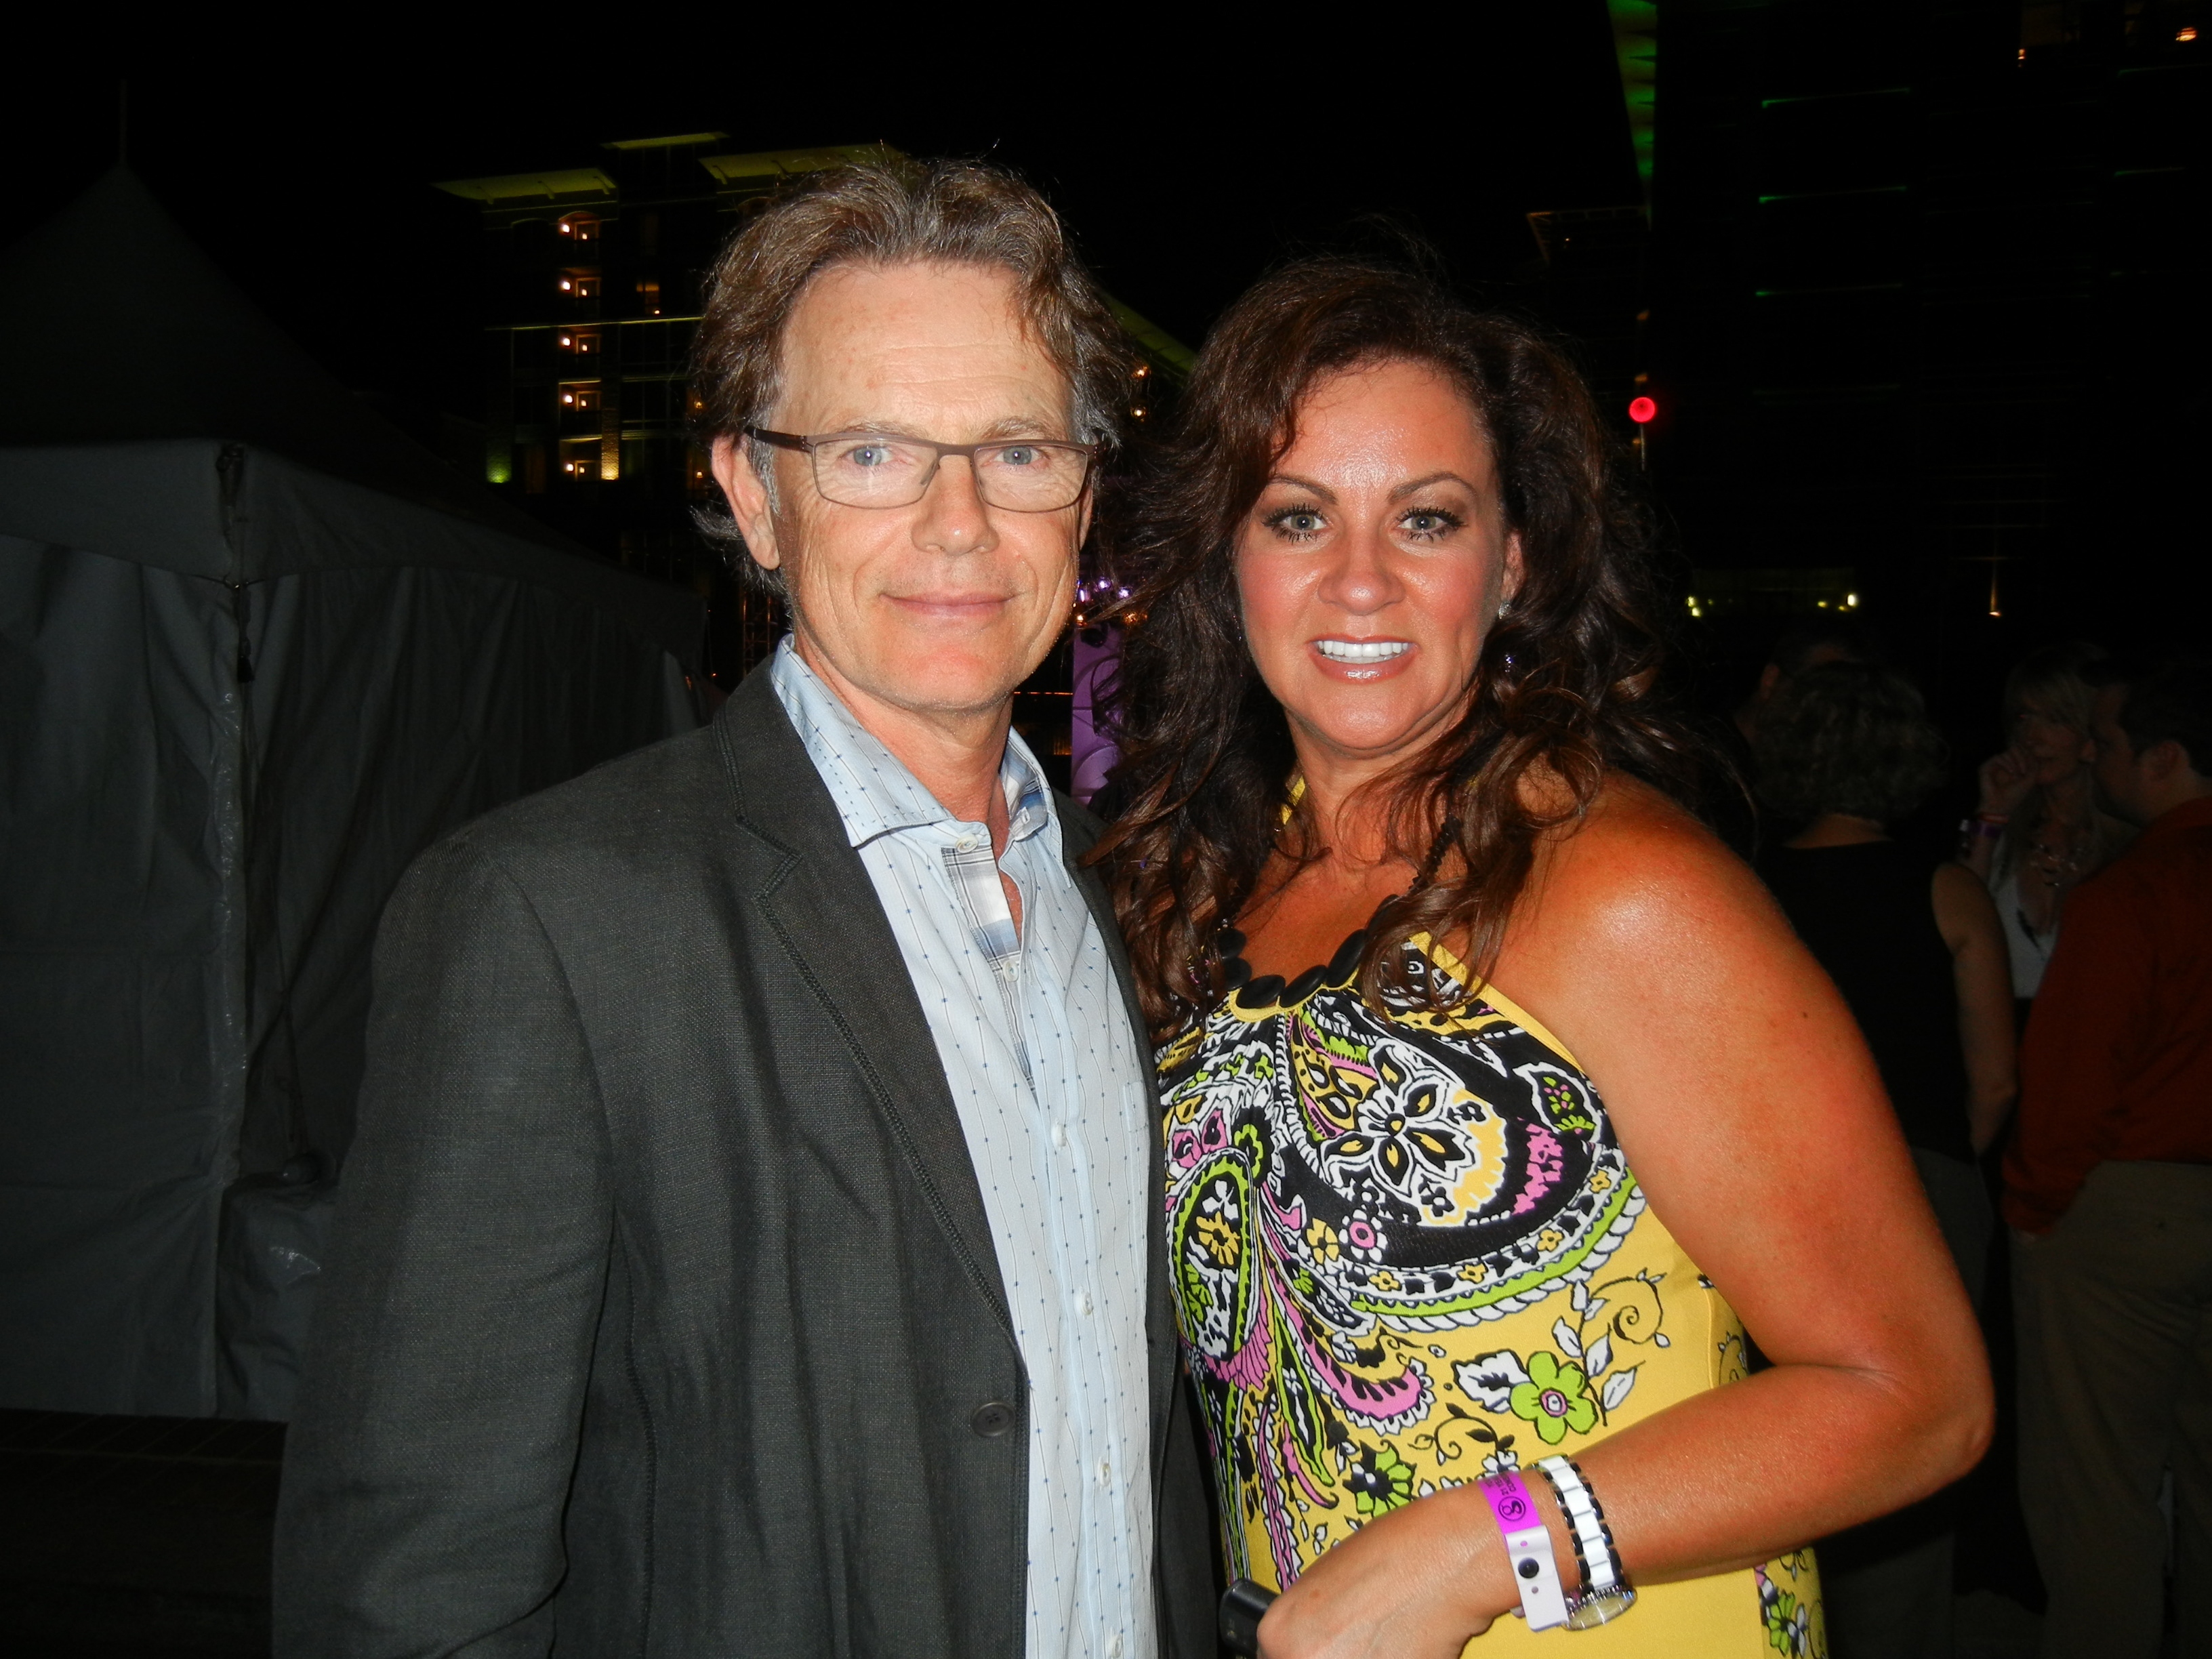 Actor Bruce Greenwood Charity event.